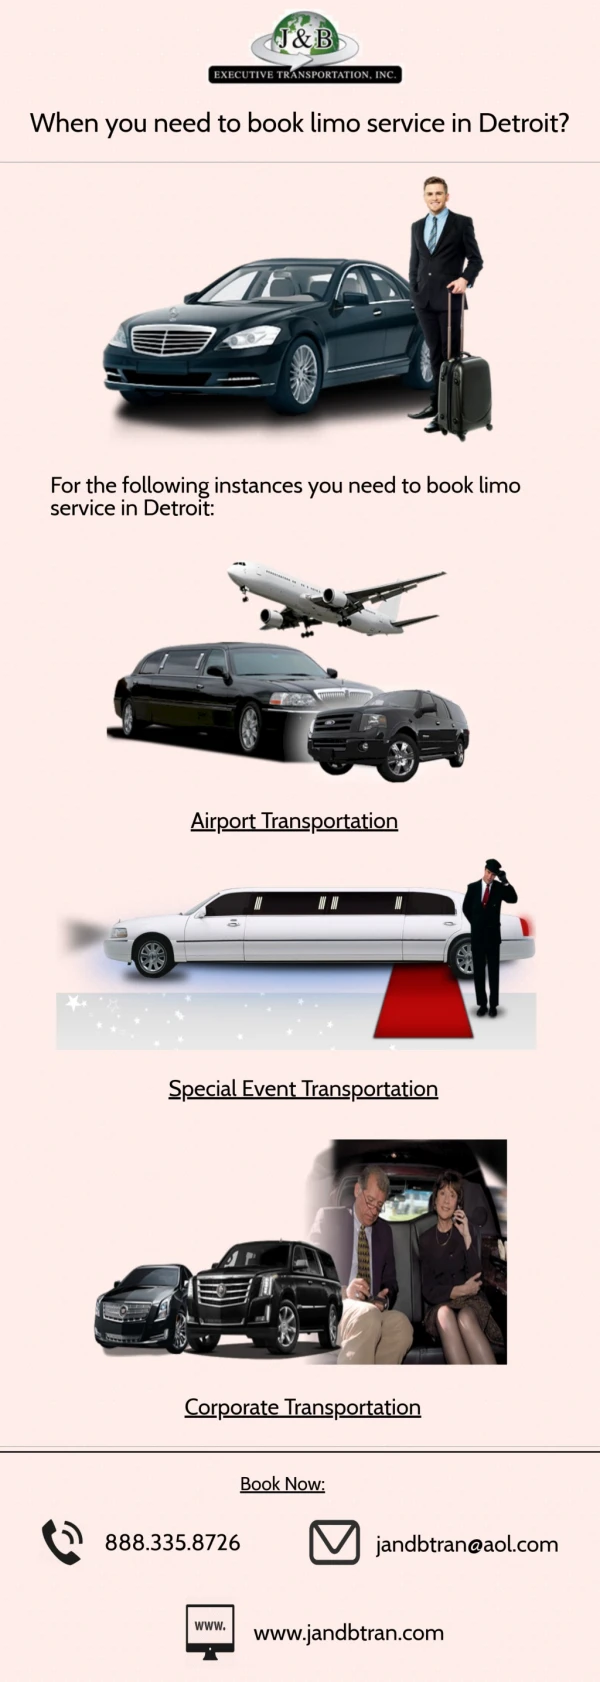 When you need to book limo service in Detroit?